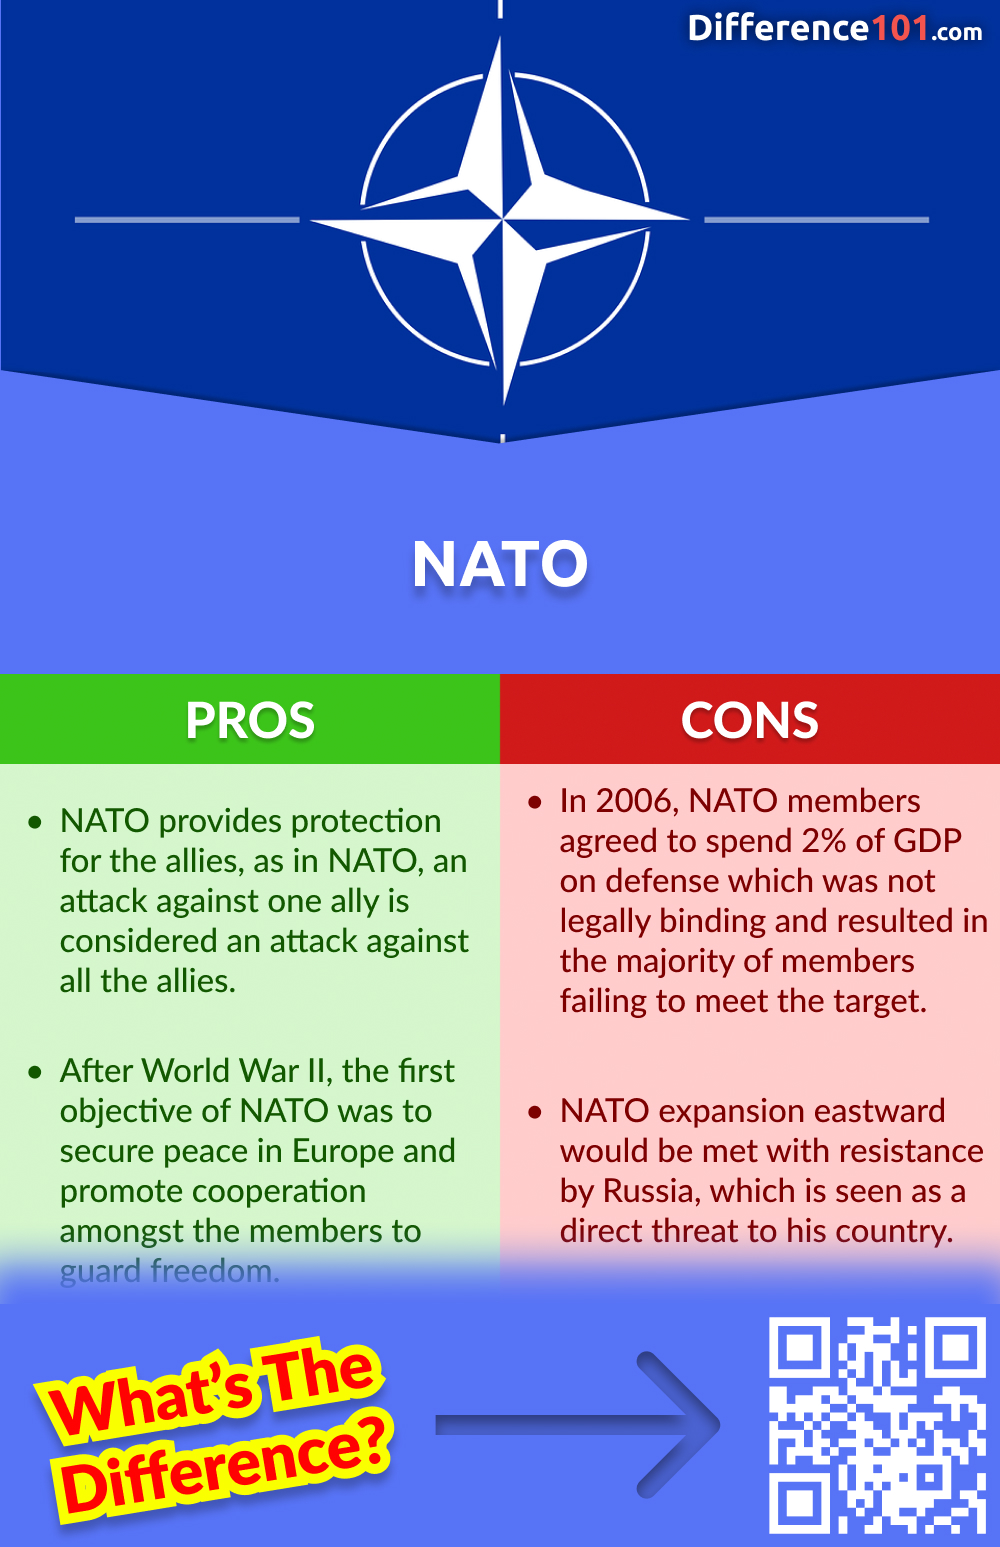 NATO Pros and Cons